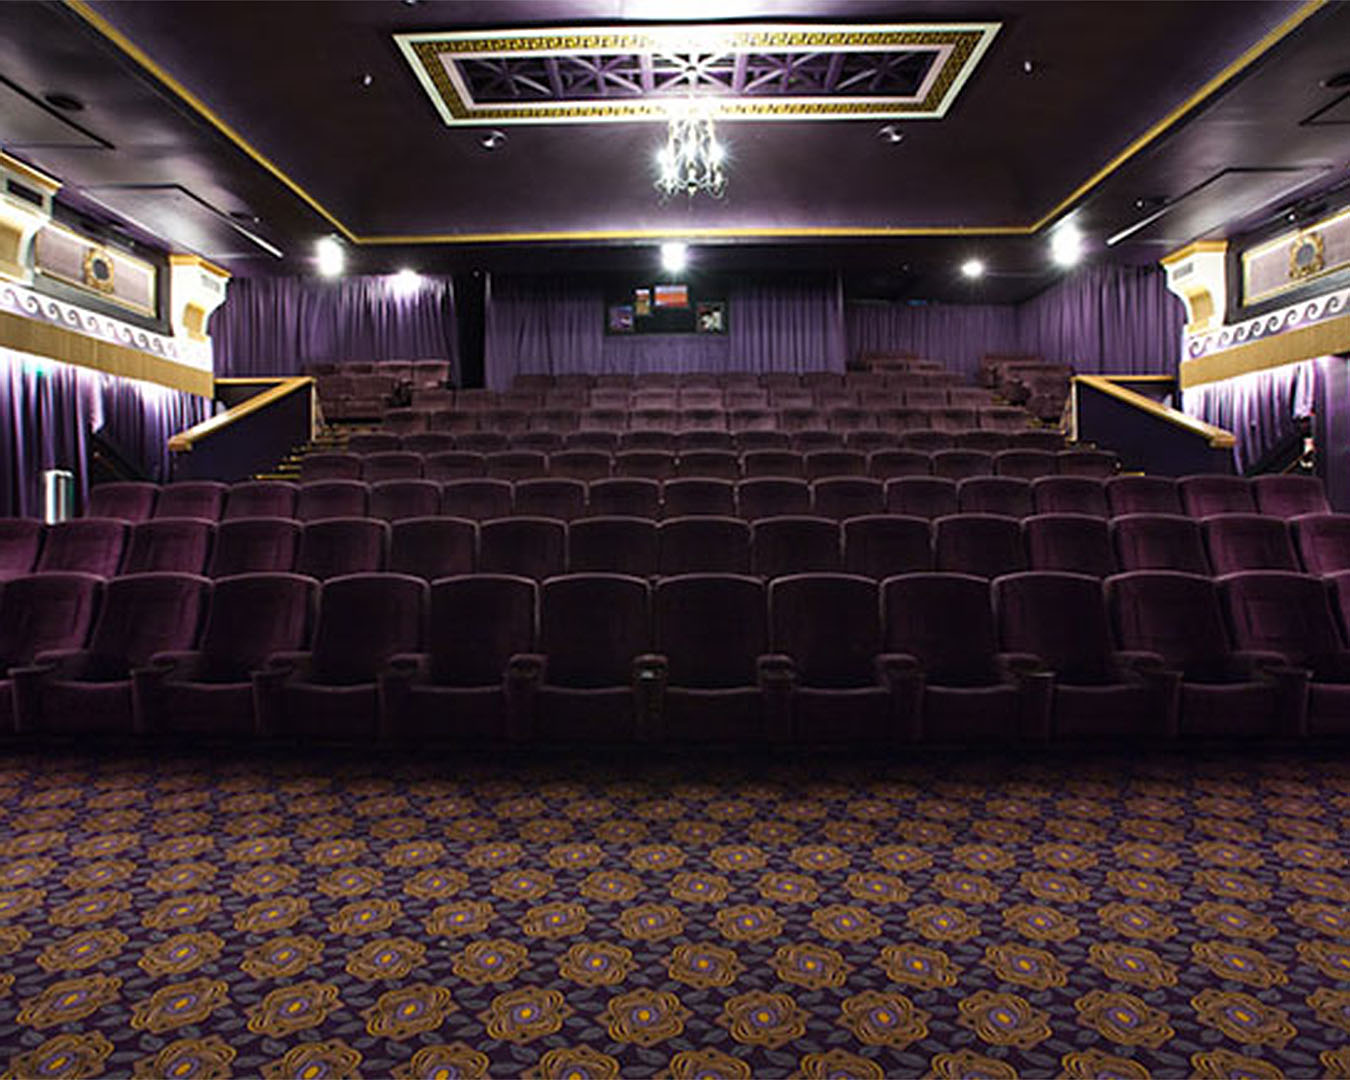 The plush purple interior of The Capitol Cinema, one of the best cinemas in Auckland.